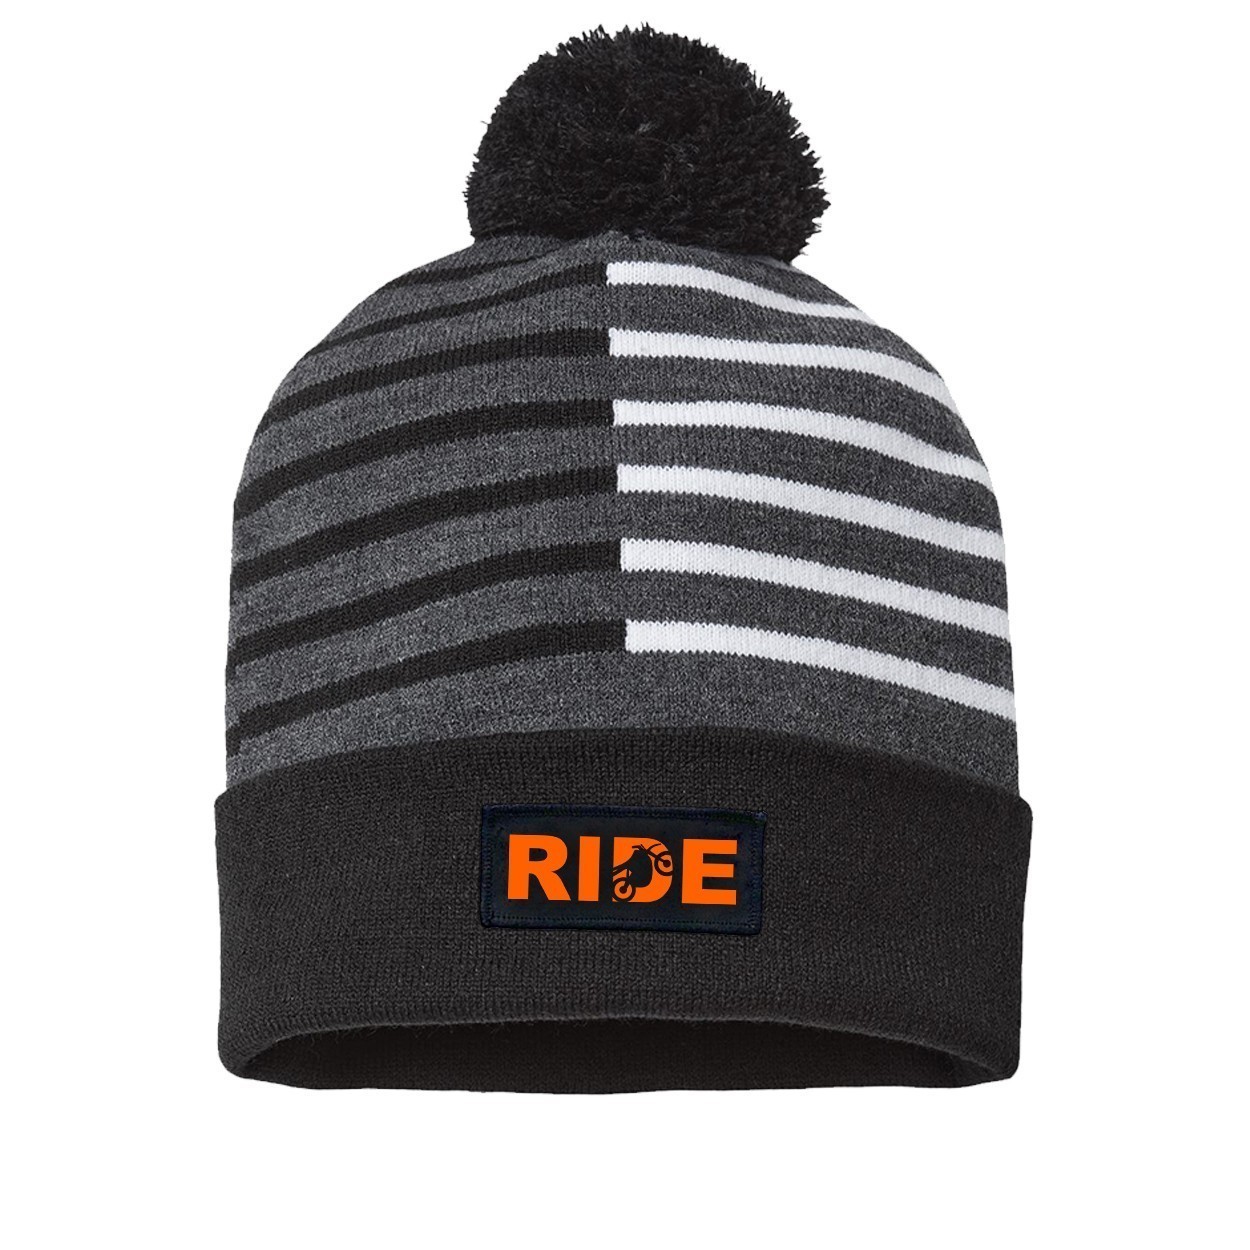 Ride Moto Logo Night Out Woven Patch Roll Up Pom Knit Beanie Half Color Black/White (Orange Logo)